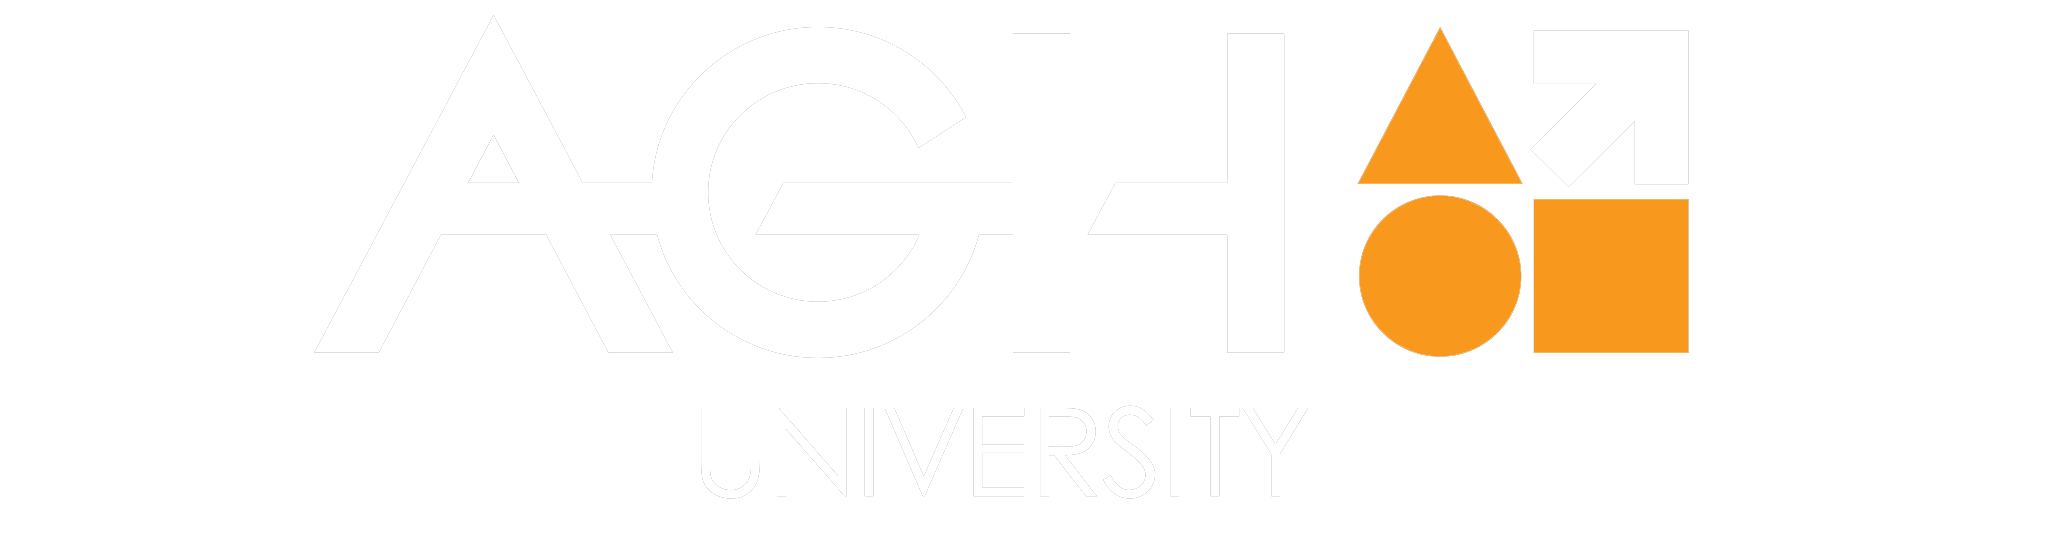 AGH University offering webinars for businesses, governments, and not-for-profits